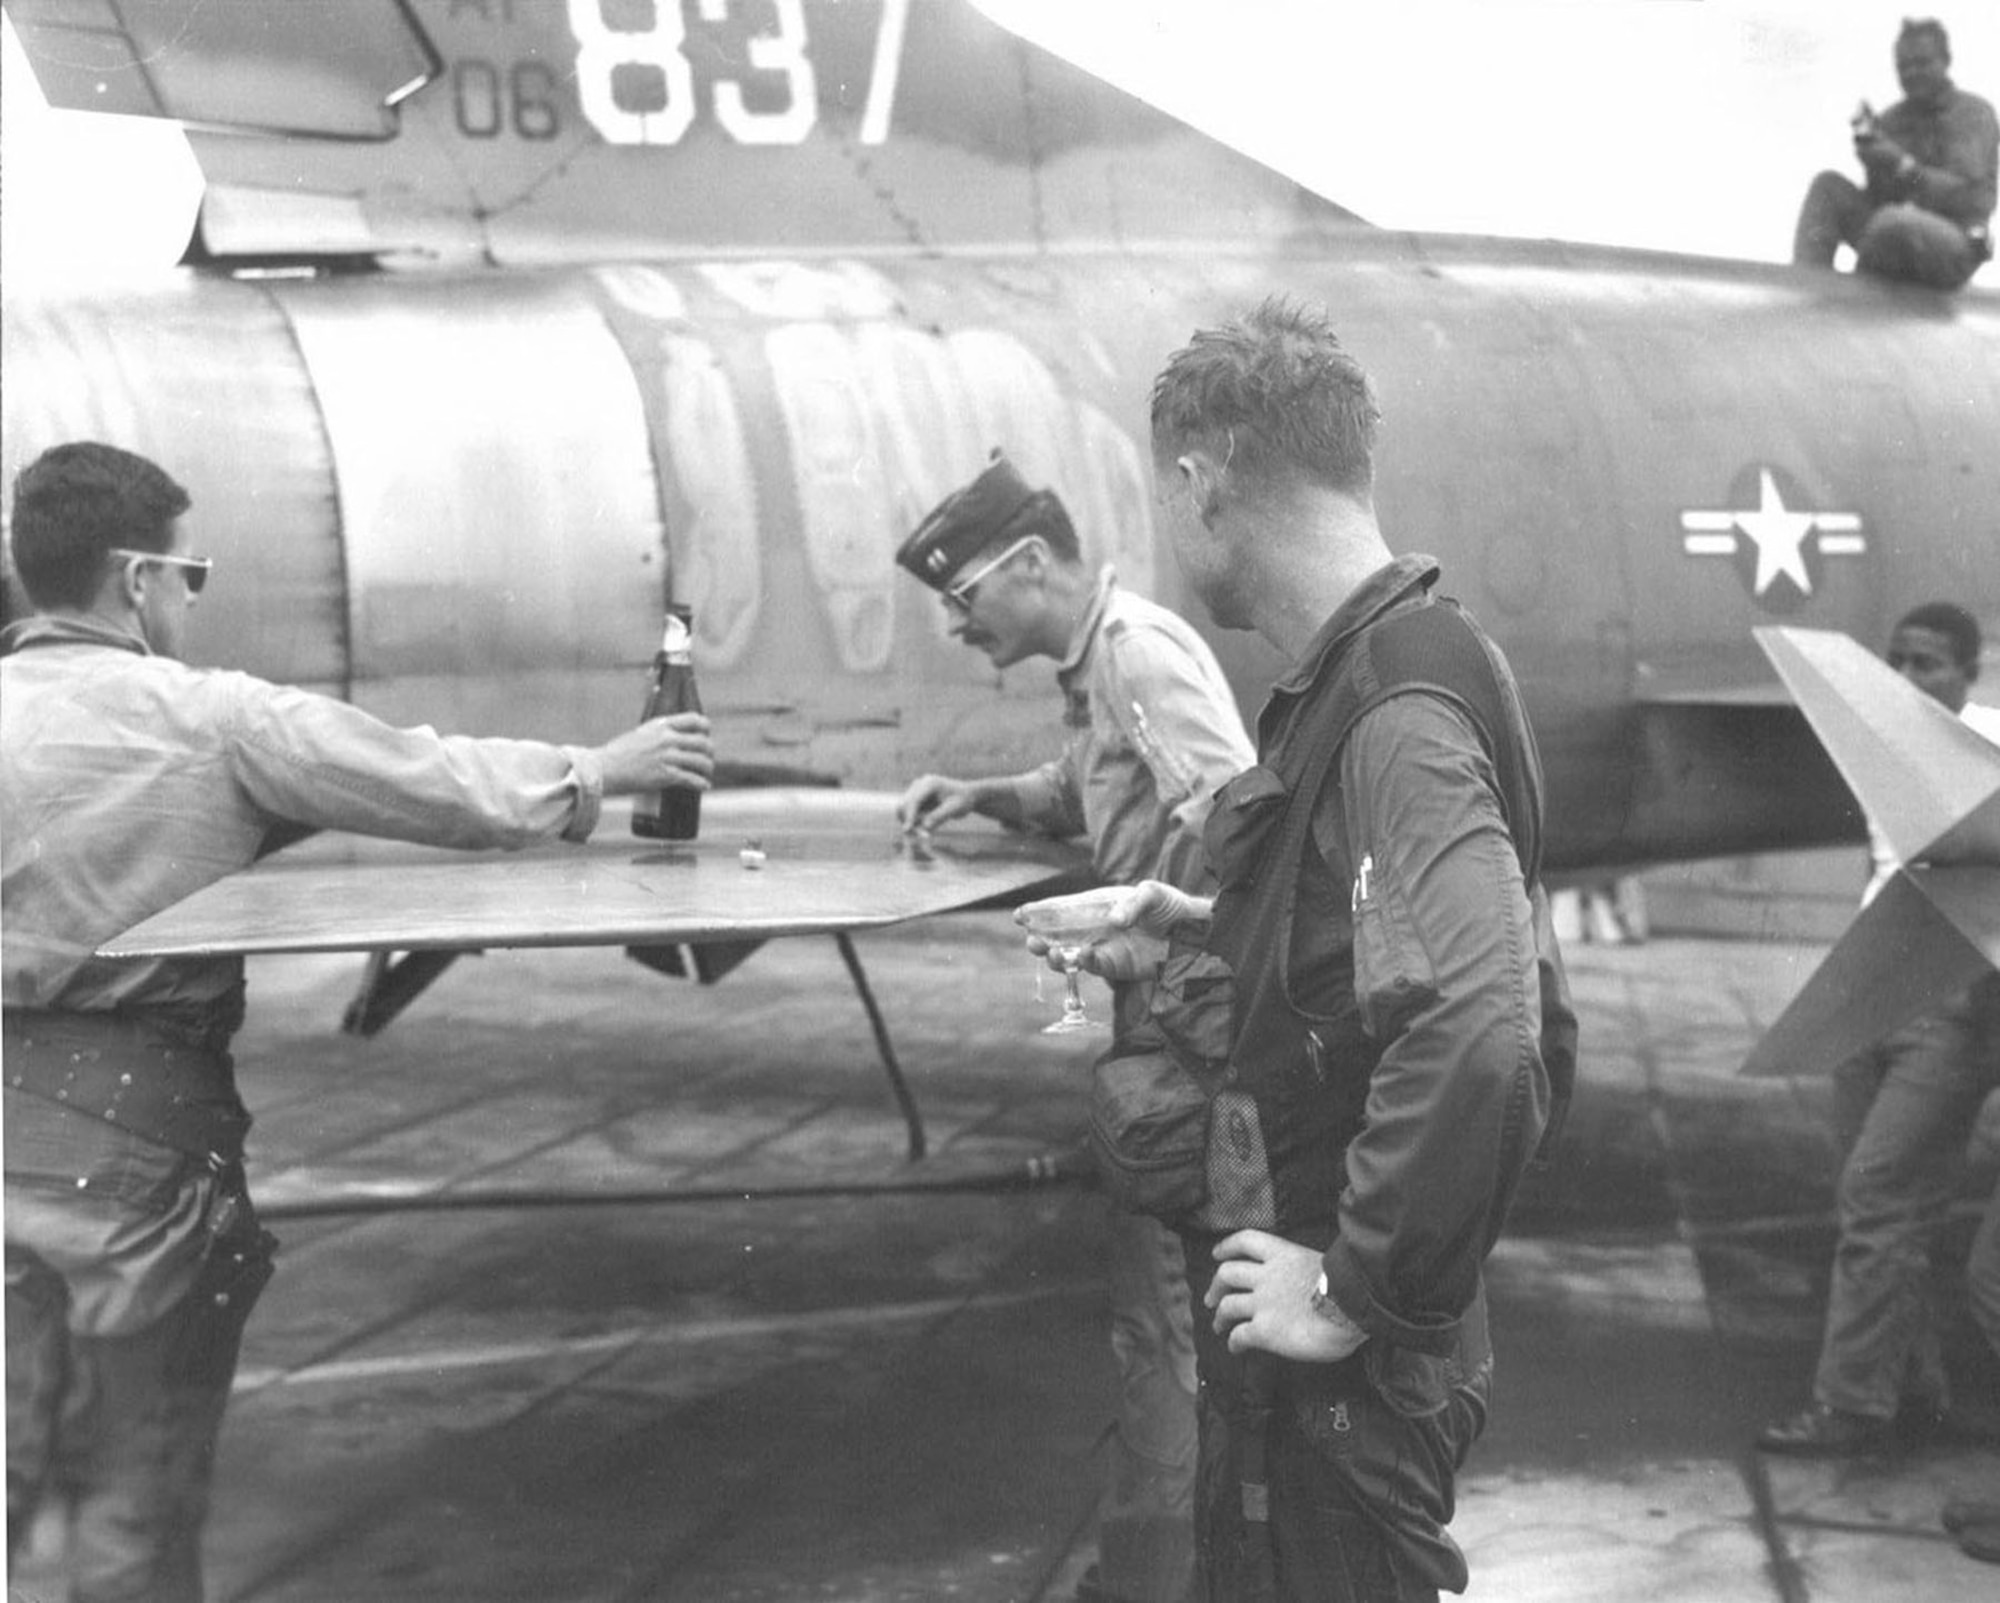 On March 18, 1968, Capt. James “Ed” Risinger finished his Misty FAC tour in the F-100F that is on display at the National Museum of the U.S. Air Force (S/N 56-3837). Capt. Risinger, holding a glass of champagne, celebrates his 58th and final mission. On the left is Capt. Brian Williams and inspecting bullet damage is Capt. Richard Rutan. (U.S. Air Force photo)